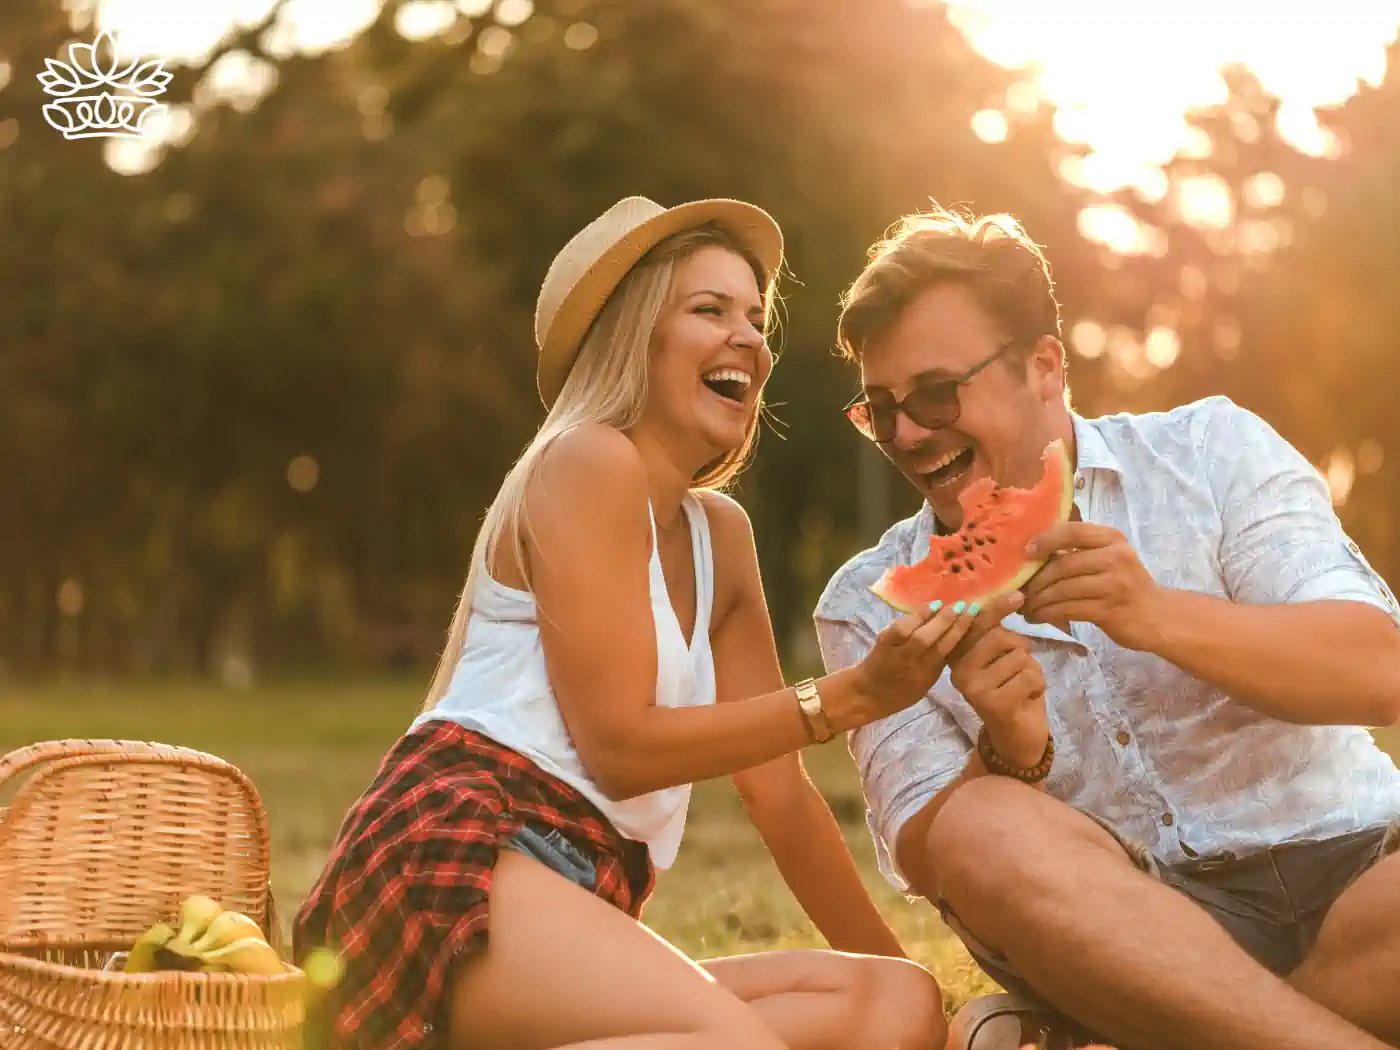 A cheerful couple enjoys a picnic in a sunlit park, sharing a slice of watermelon with smiles and laughter. A woven basket is placed beside them, filled with fresh fruit. Fabulous Flowers and Gifts at the end. Gift Boxes for Girlfriend.